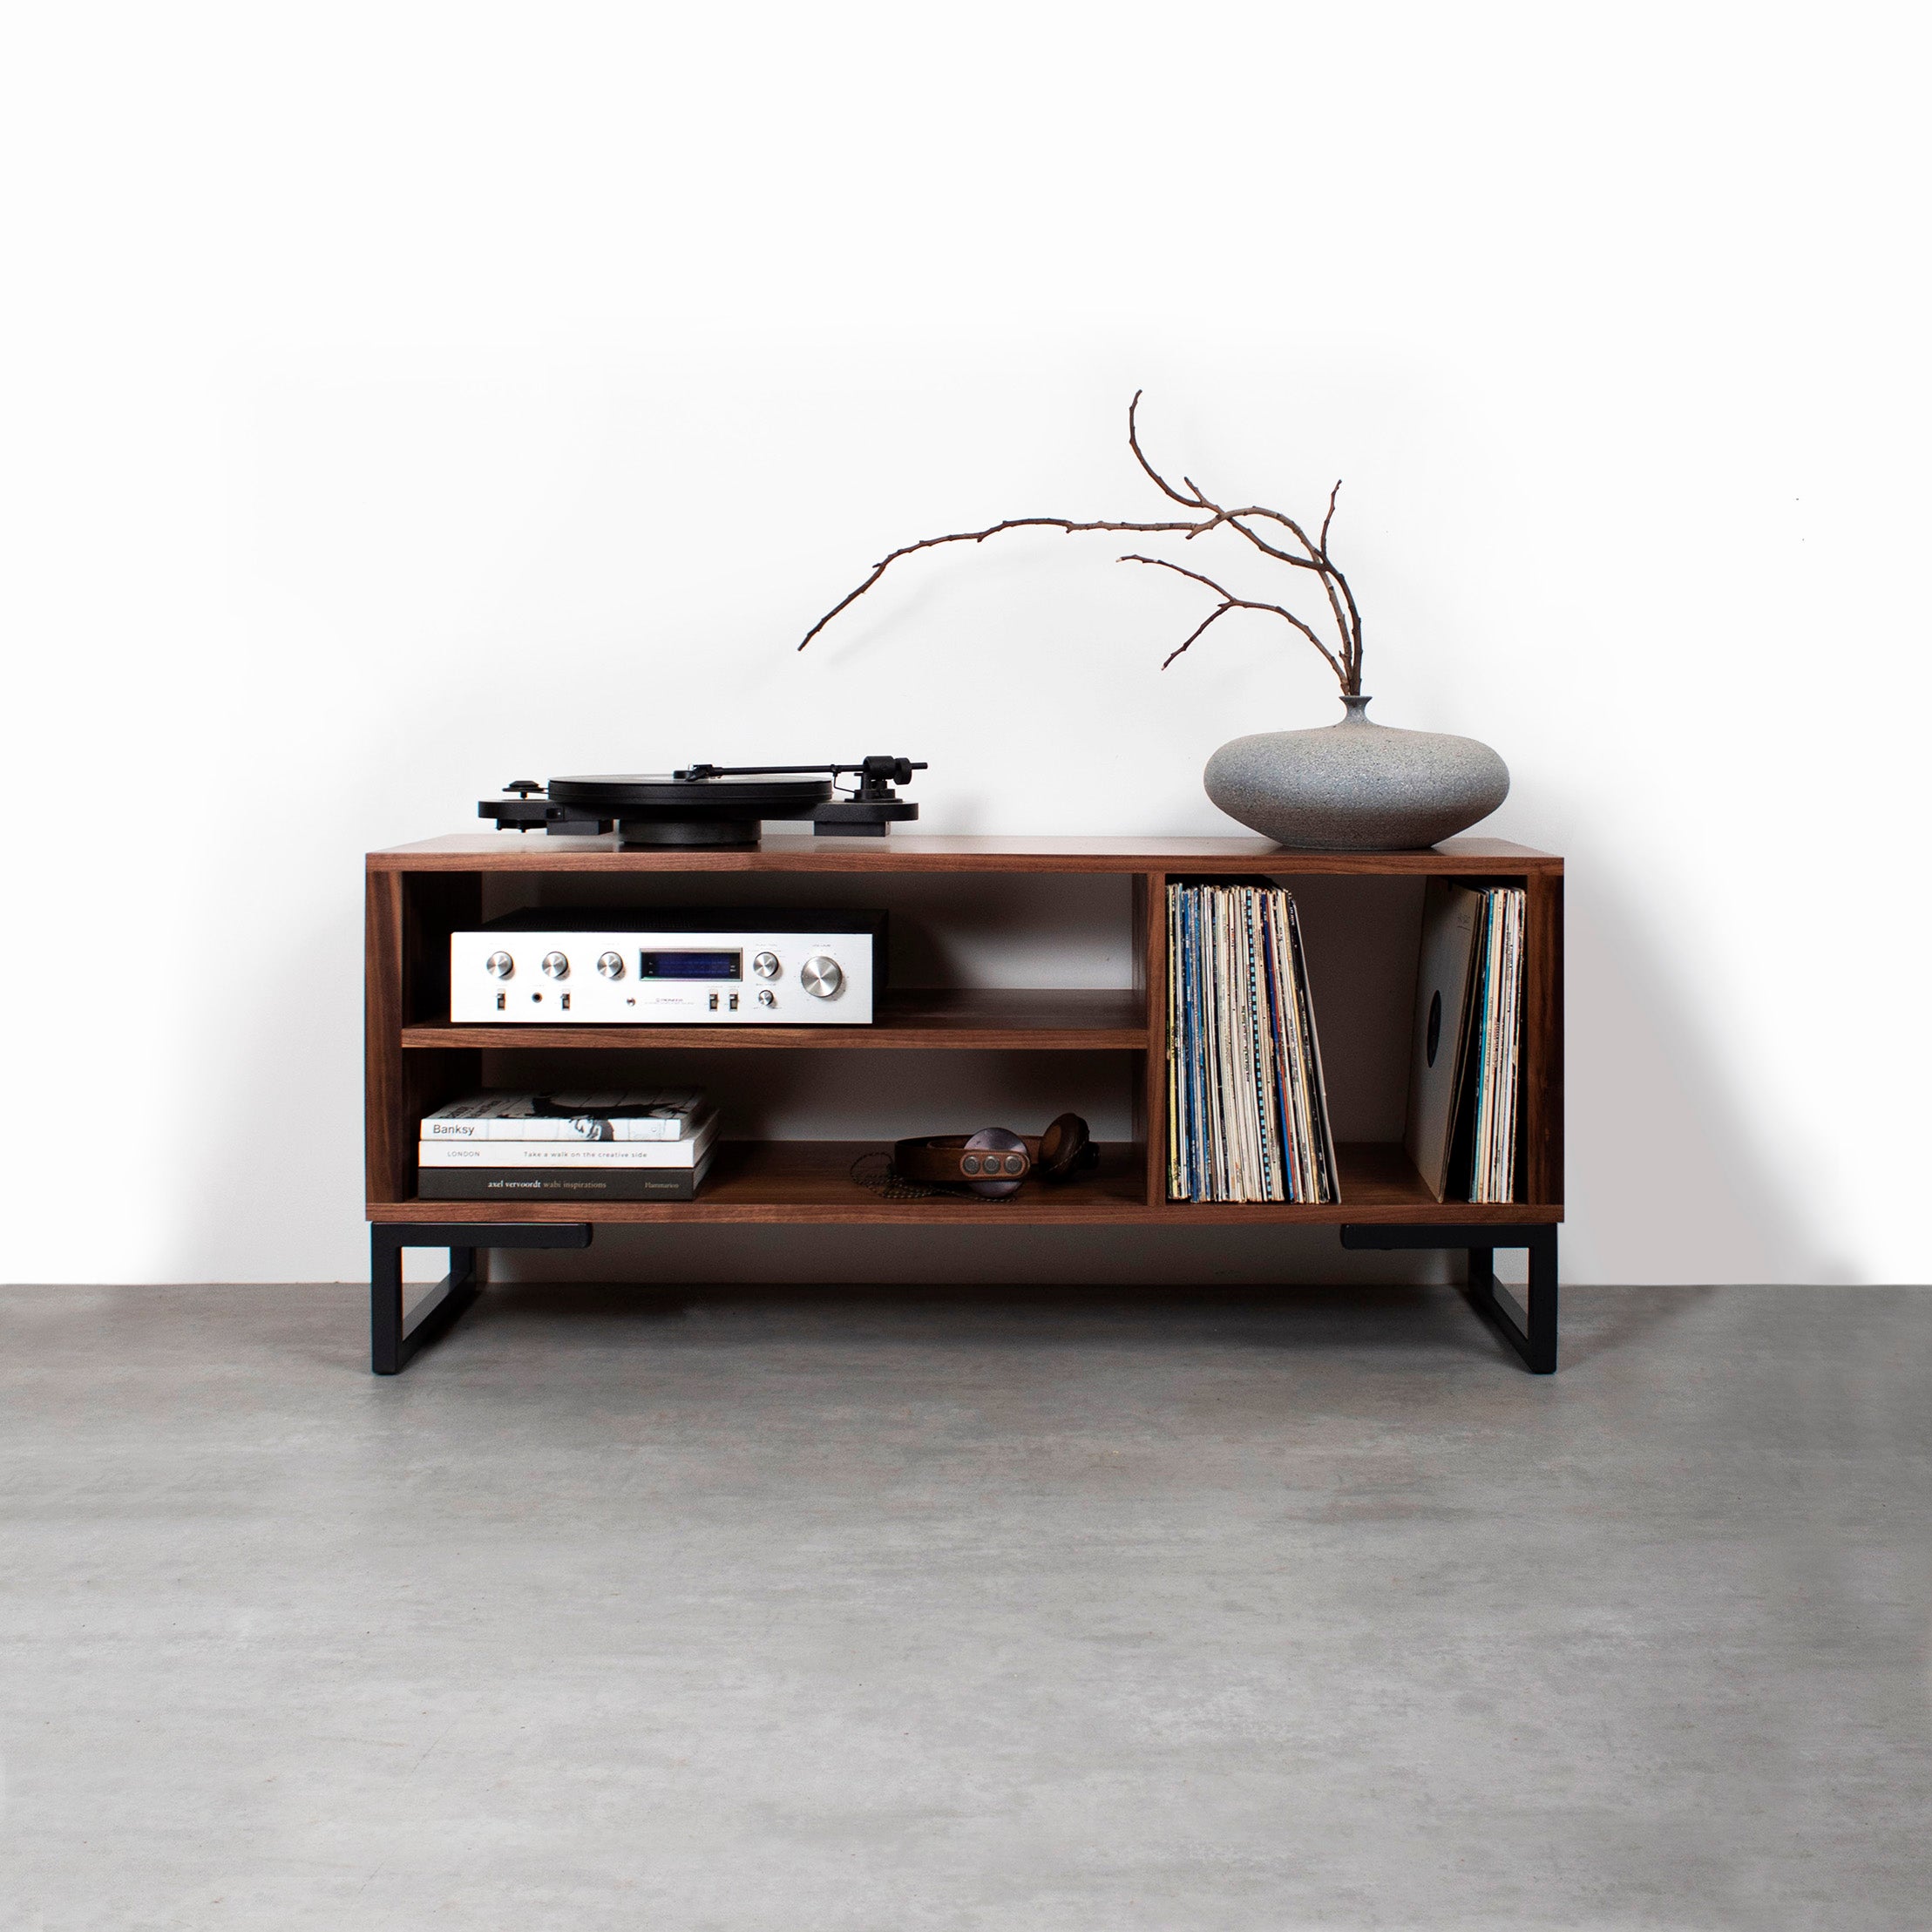 walnut media console stand for vinyl record player, hifi or as a TV stand